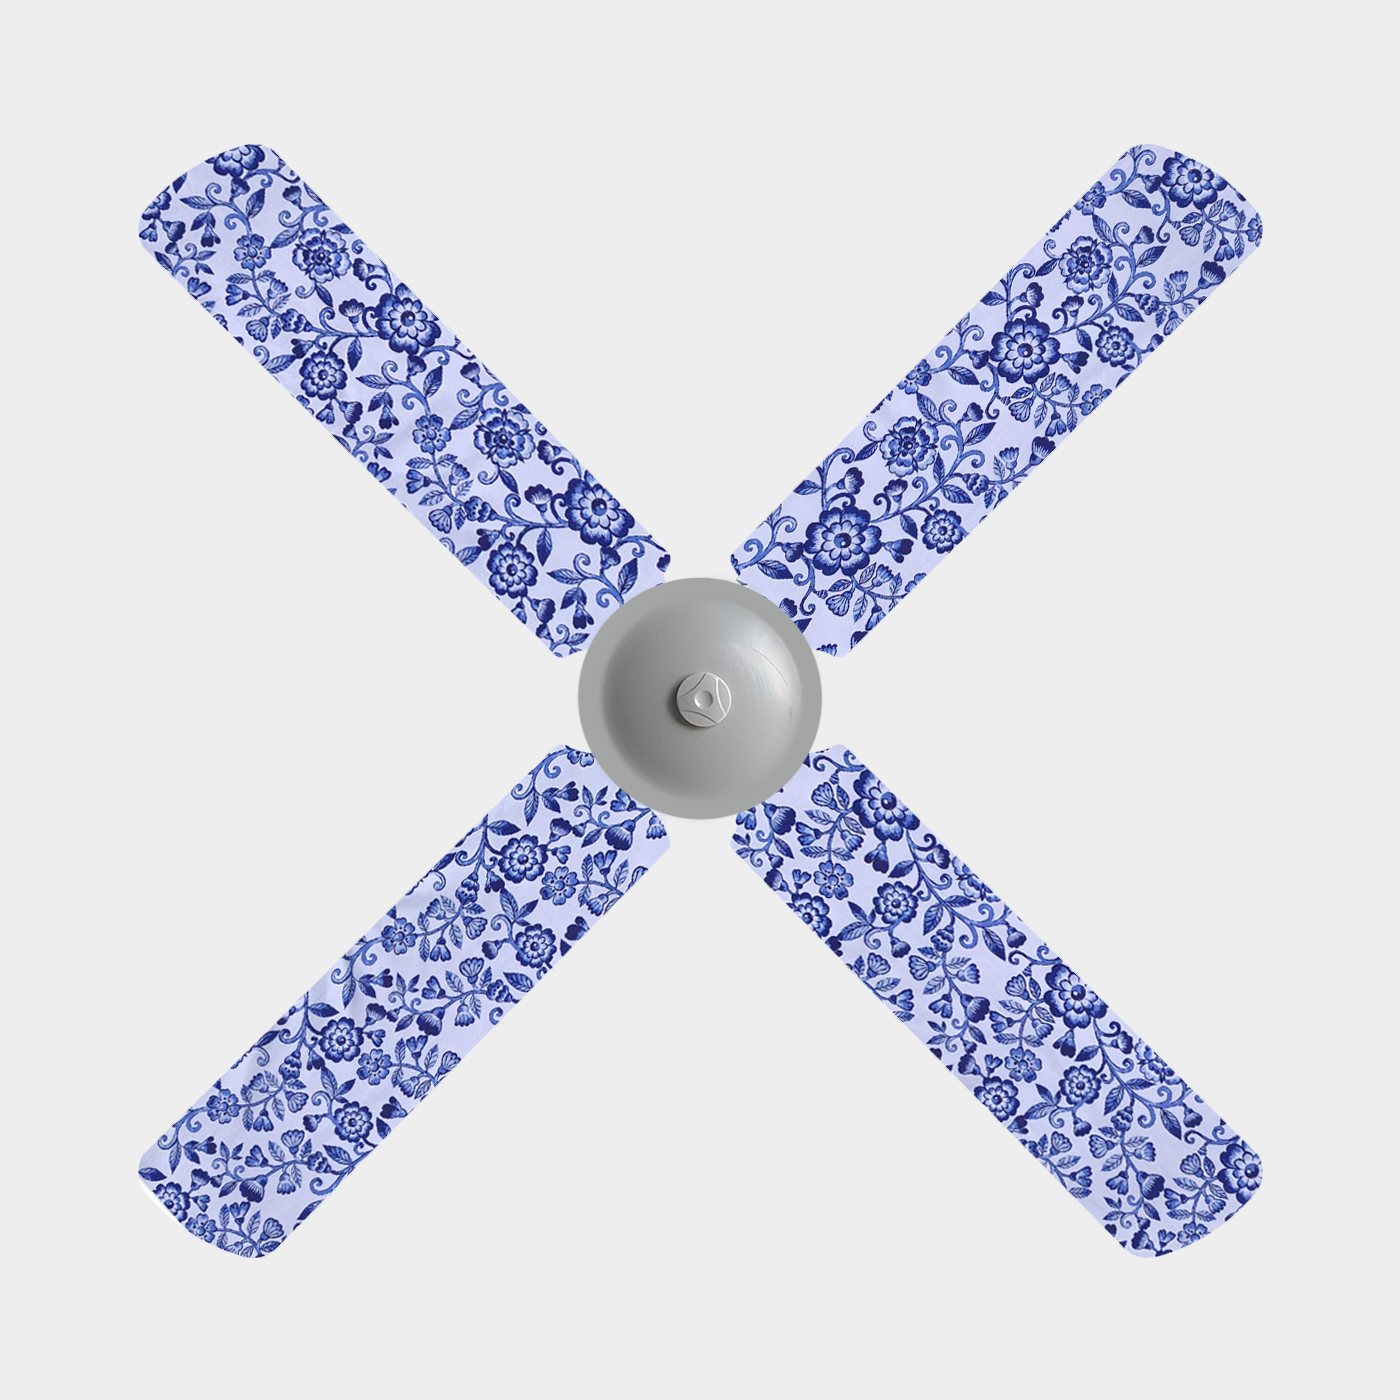 Fan blade covers with blue hamptons-inspired flowers on a white background